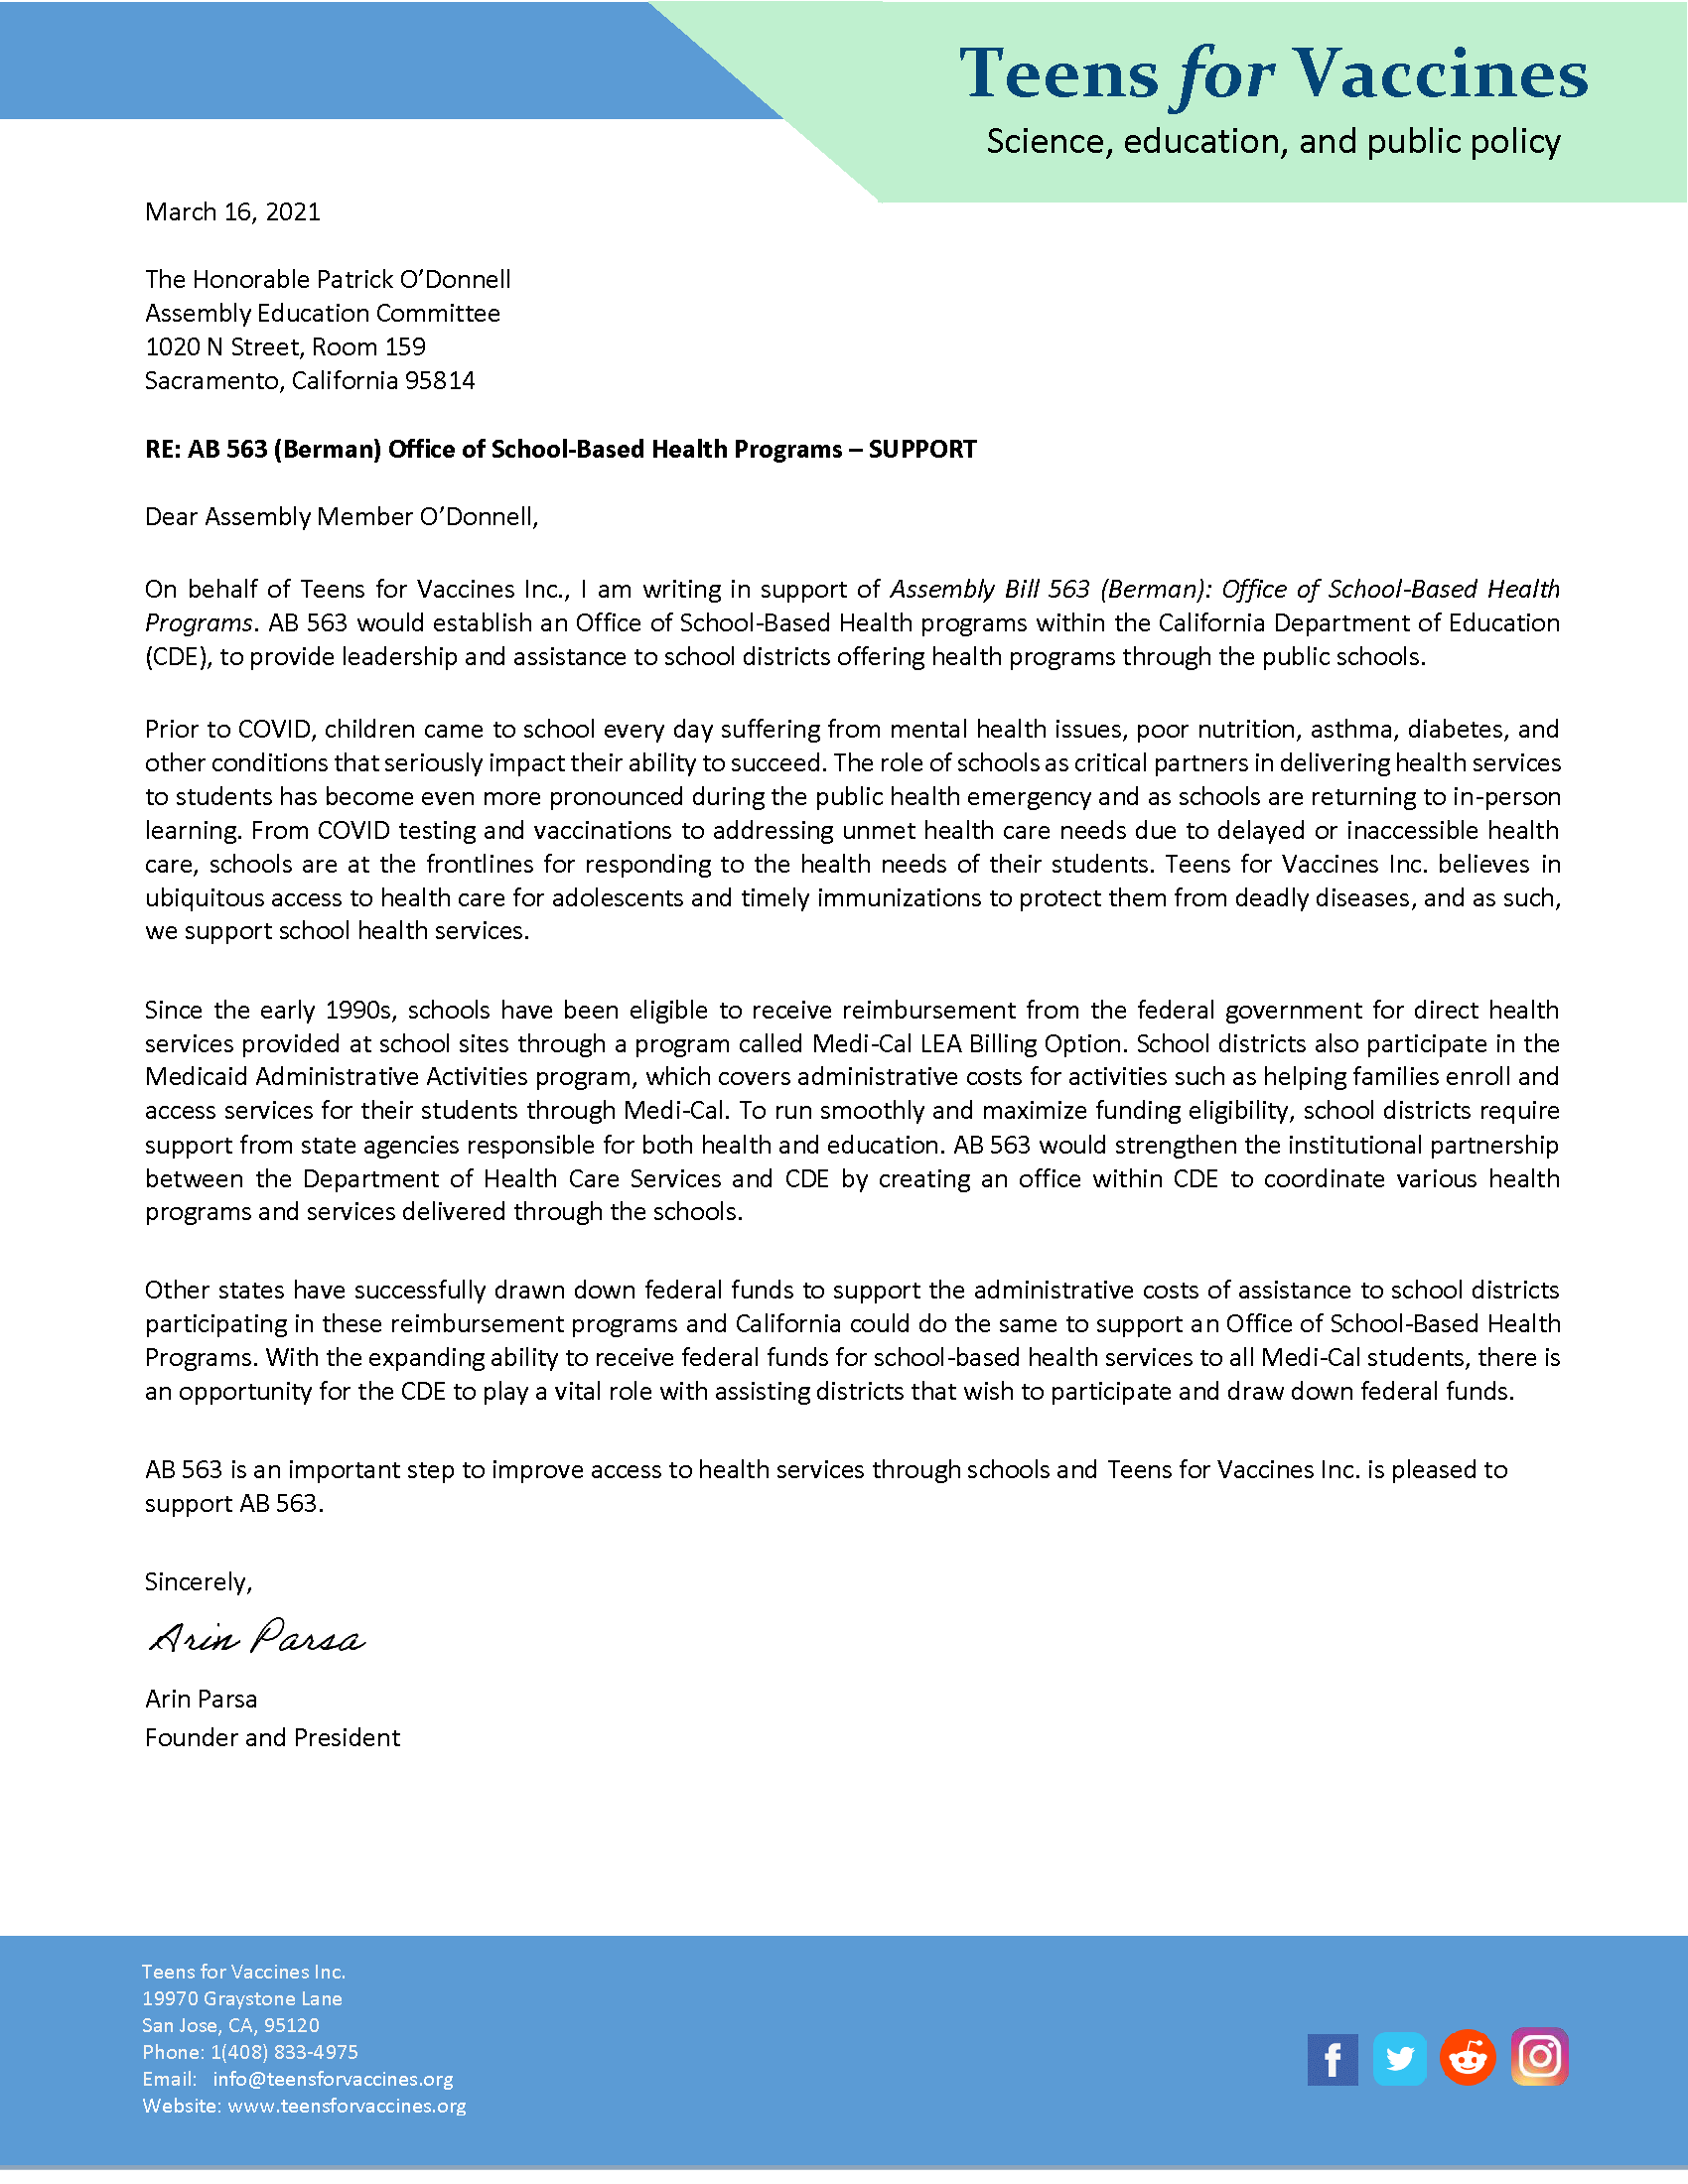 AB 563 Support Letter - Teens for Vaccines Inc.